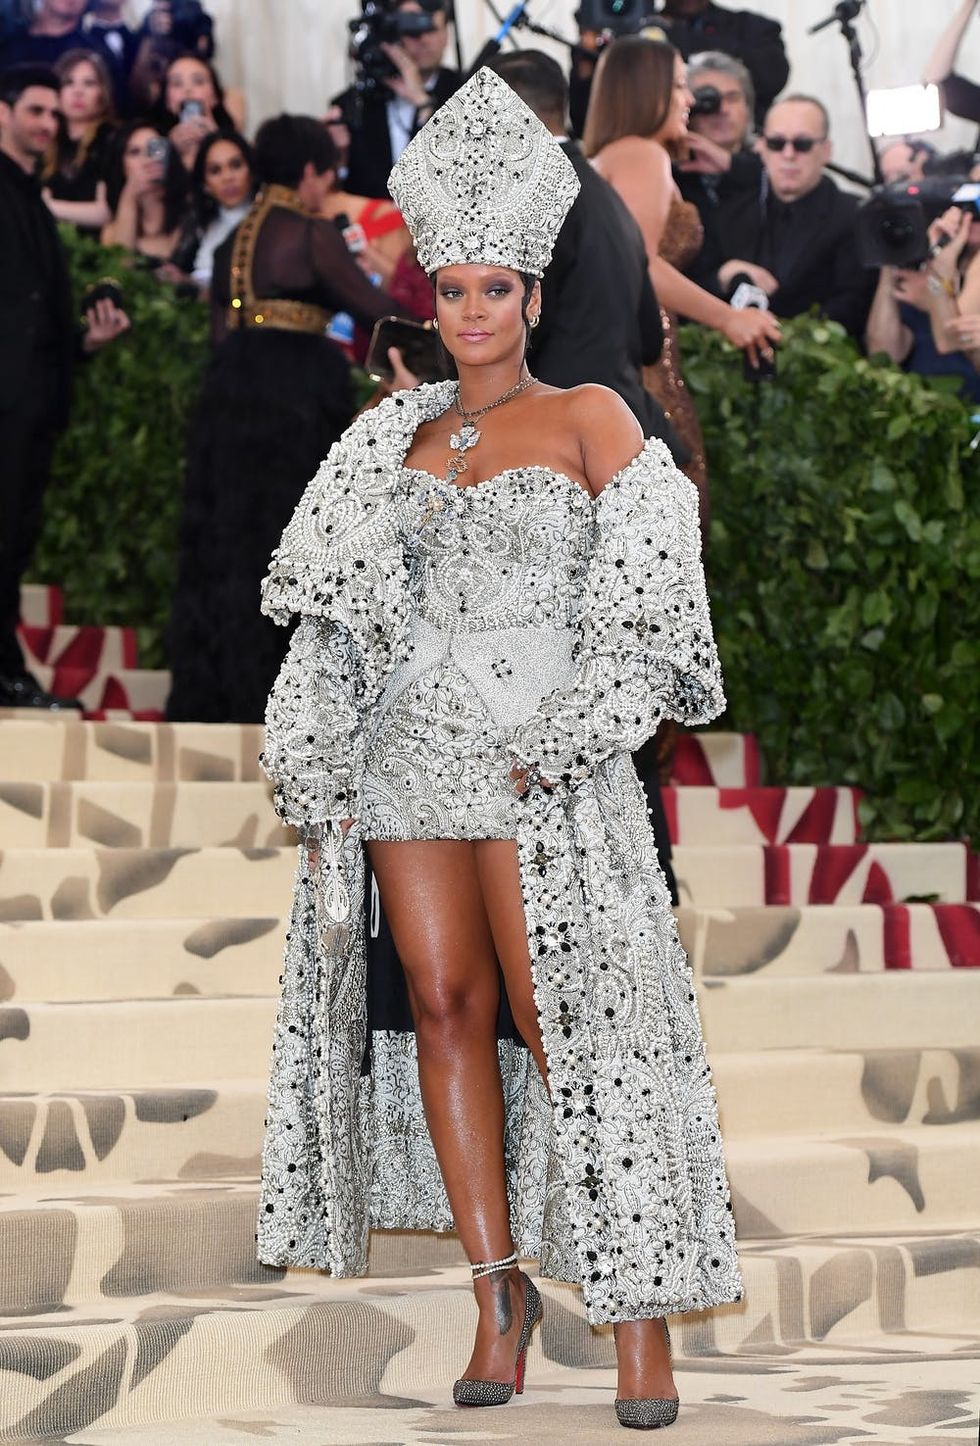 Met Gala 2018 Red Carpet: All the Heavenly Celebrity Looks You’re Dying ...